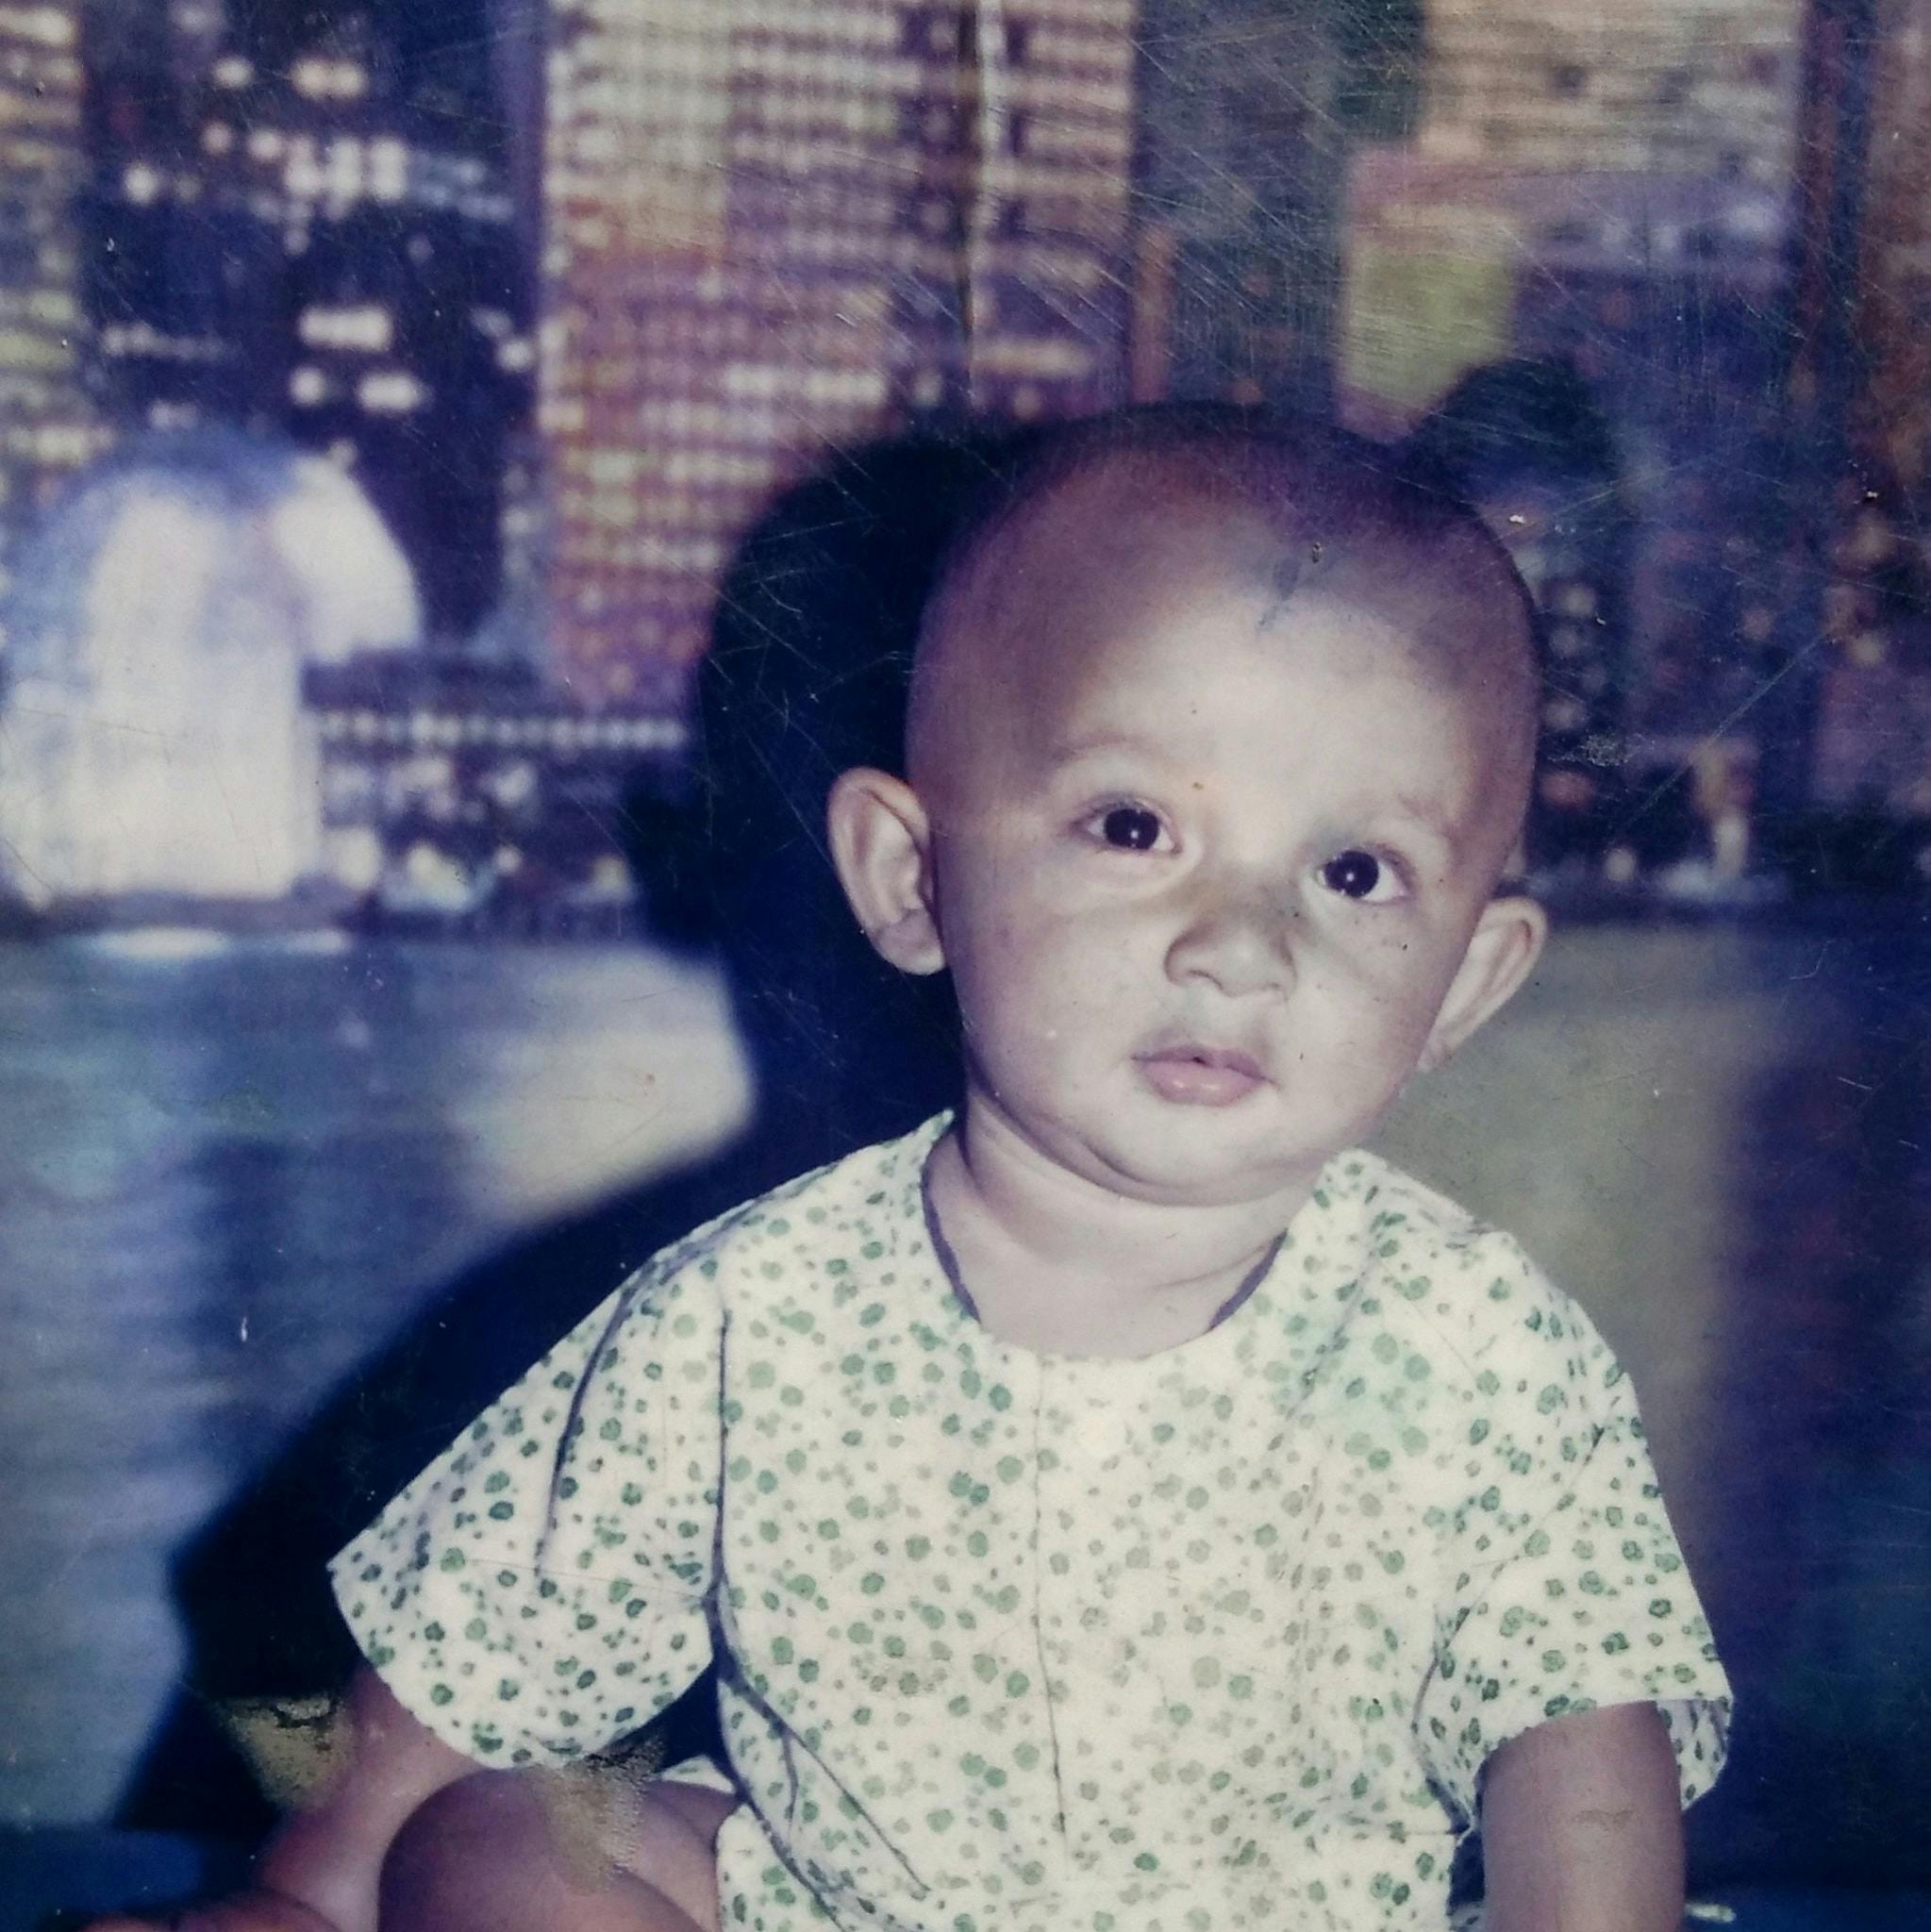 Me at the age of 1 or 0.5 year